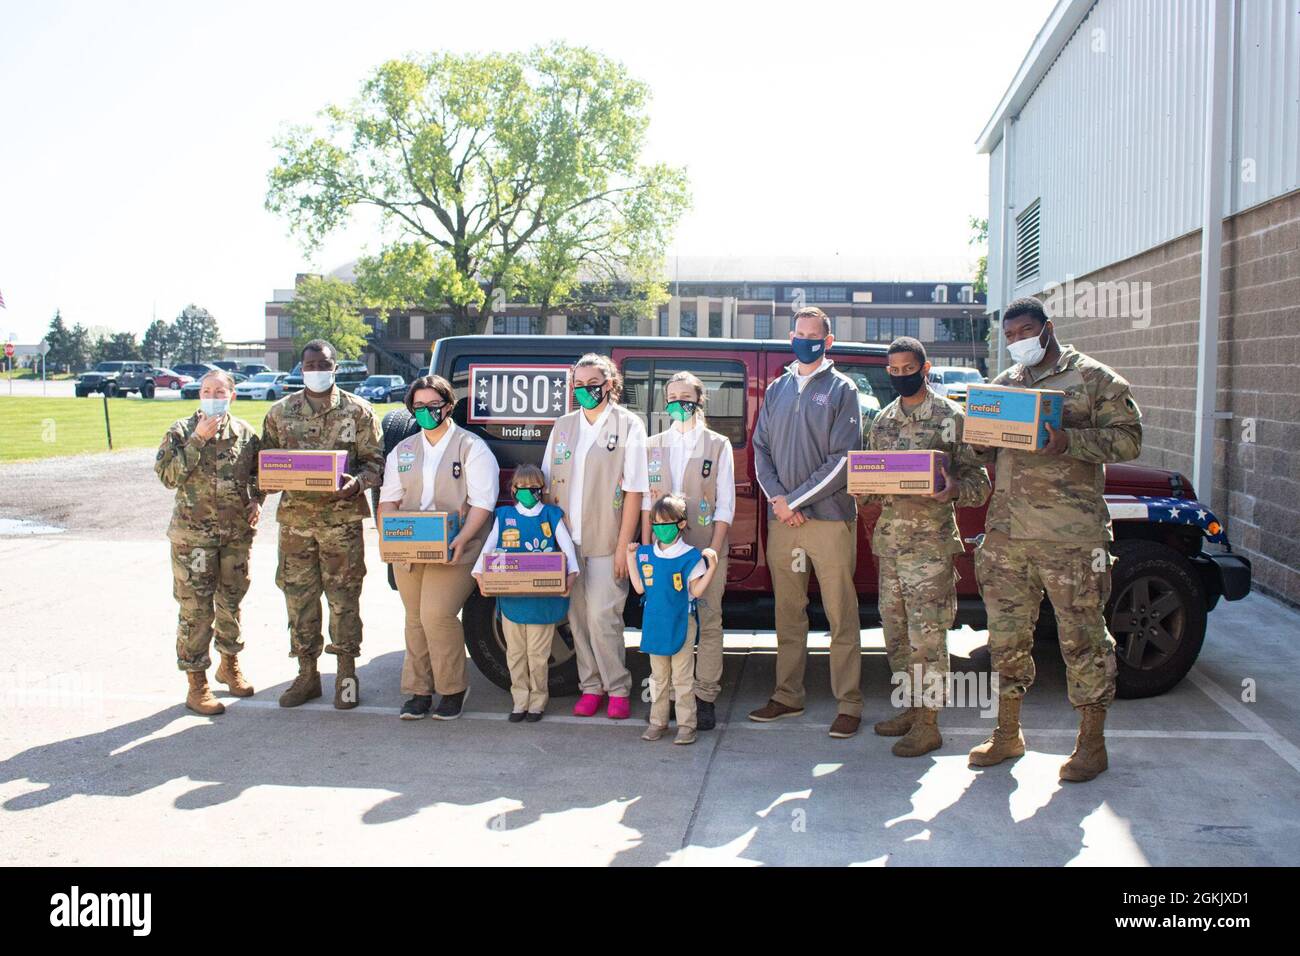 On Friday, May 7th, the Girl Scouts of America donated 48,000 packages of cookies to the Indiana National Guard at Stout Field in Indianapolis, IN.     Brig. Gen. Winslow was there to receive the pallets of cookies from uniformed Girl Scouts and Danielle Shockey, chief executive officer of Girl Scouts of Central Indiana. Stock Photo